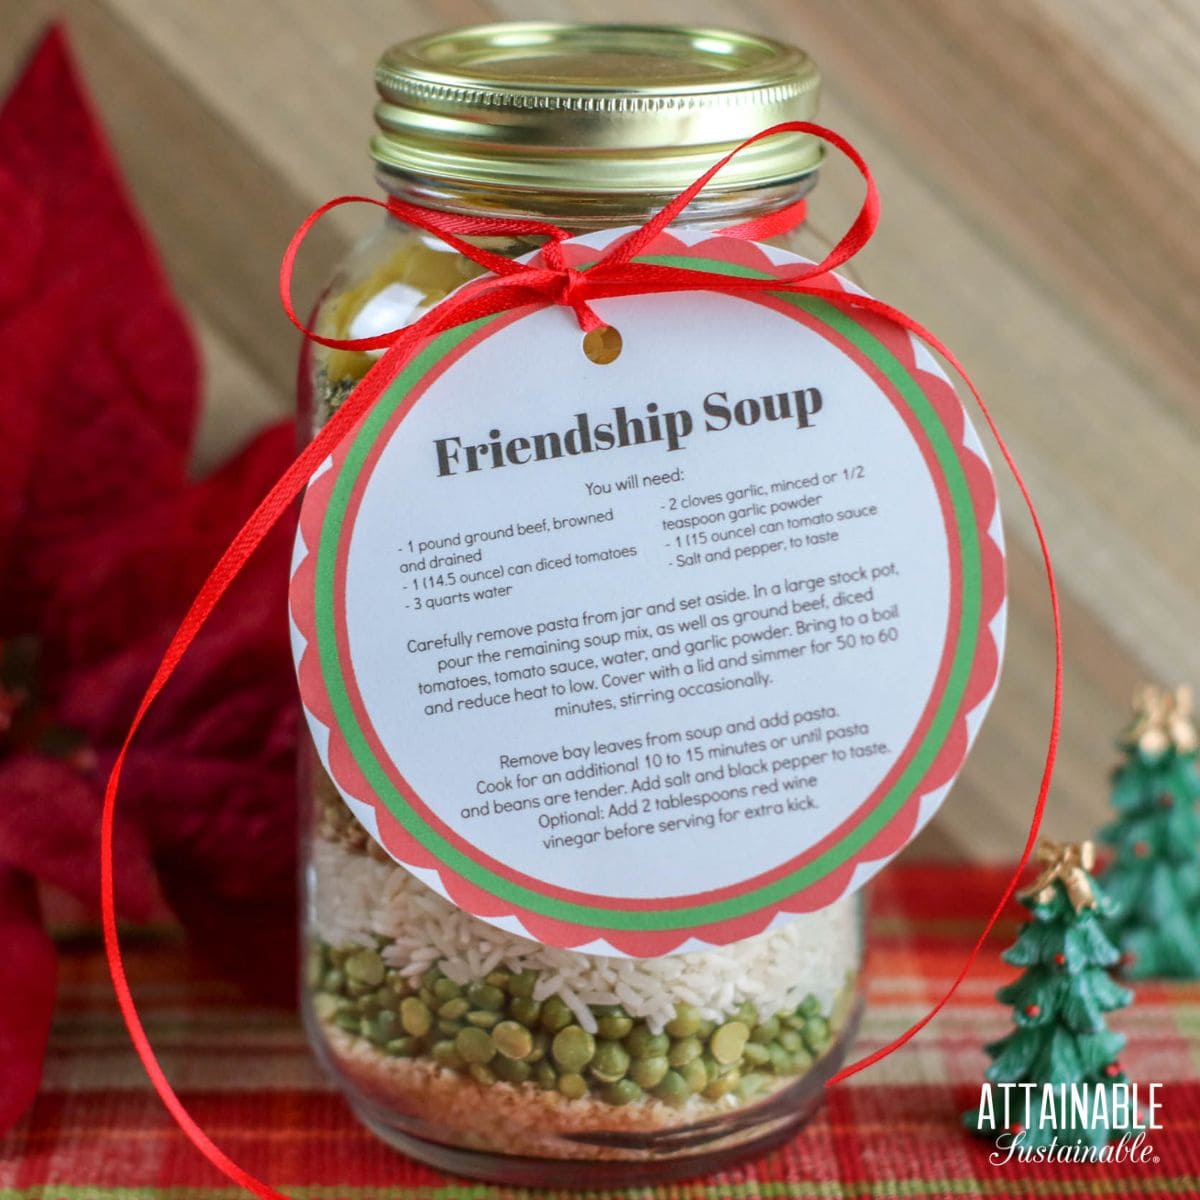 https://www.attainable-sustainable.net/wp-content/uploads/2020/12/soup-in-a-jar-2.jpg